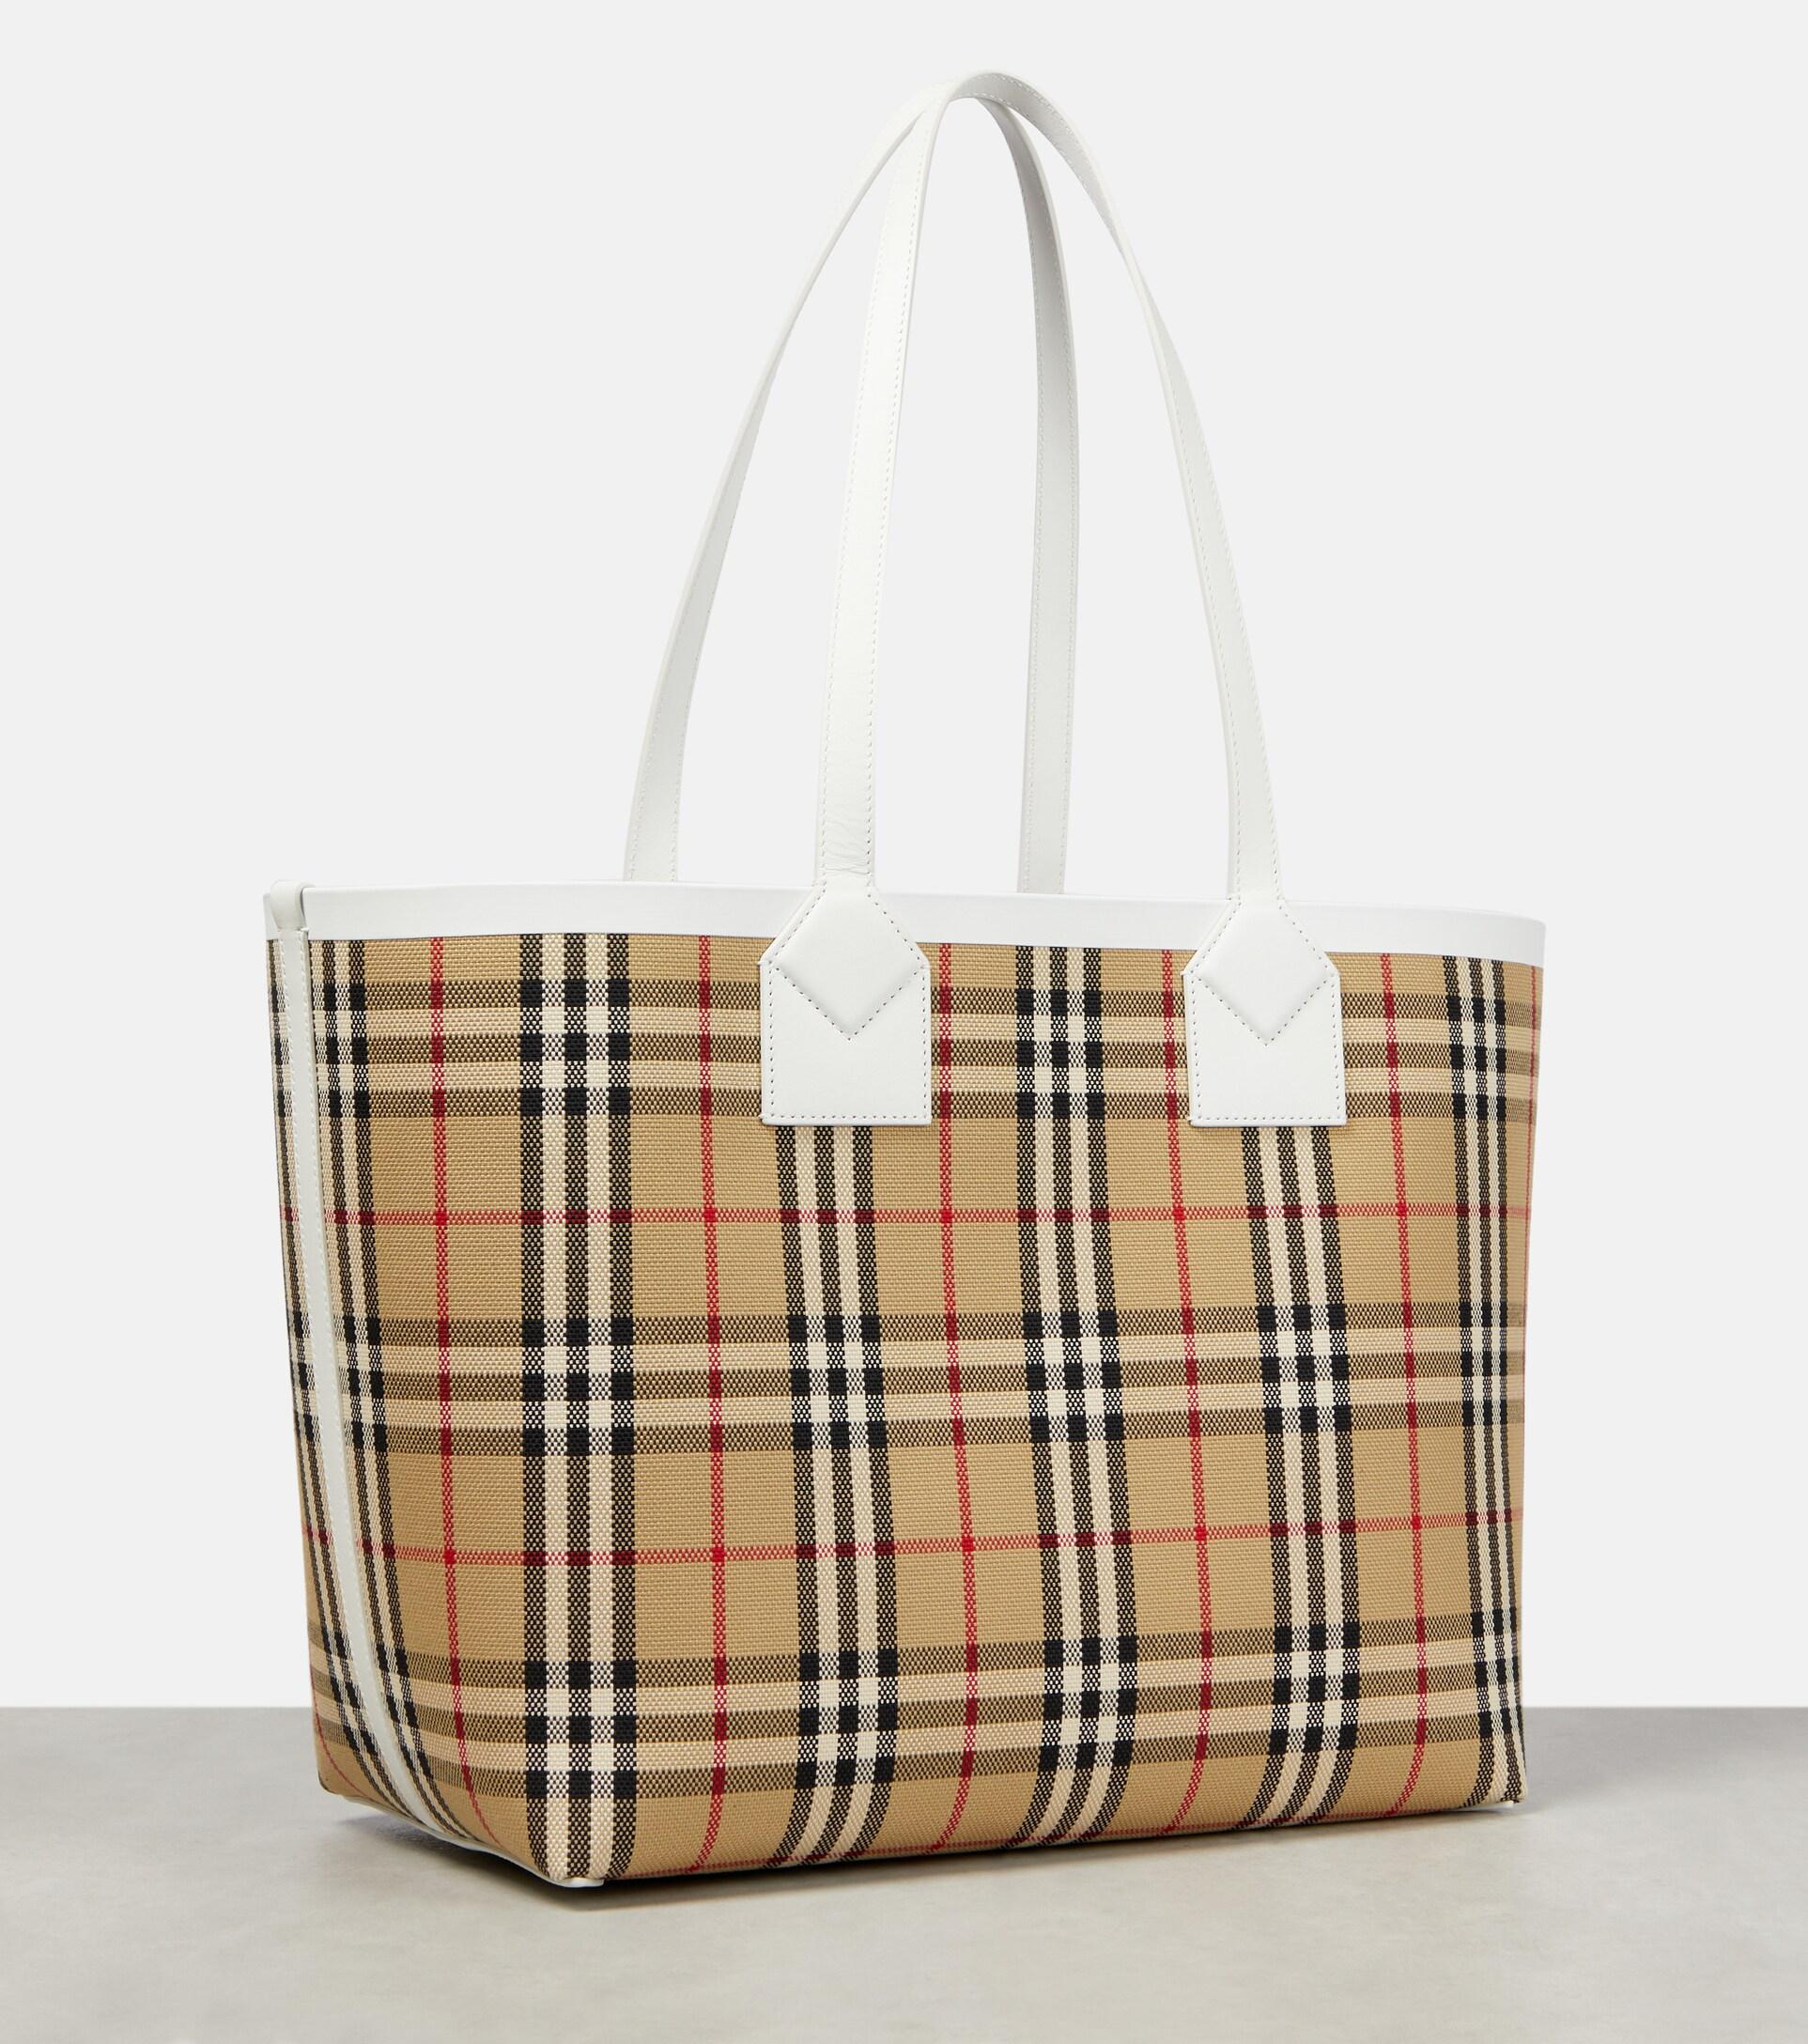 Women's London Tote Bag by Burberry